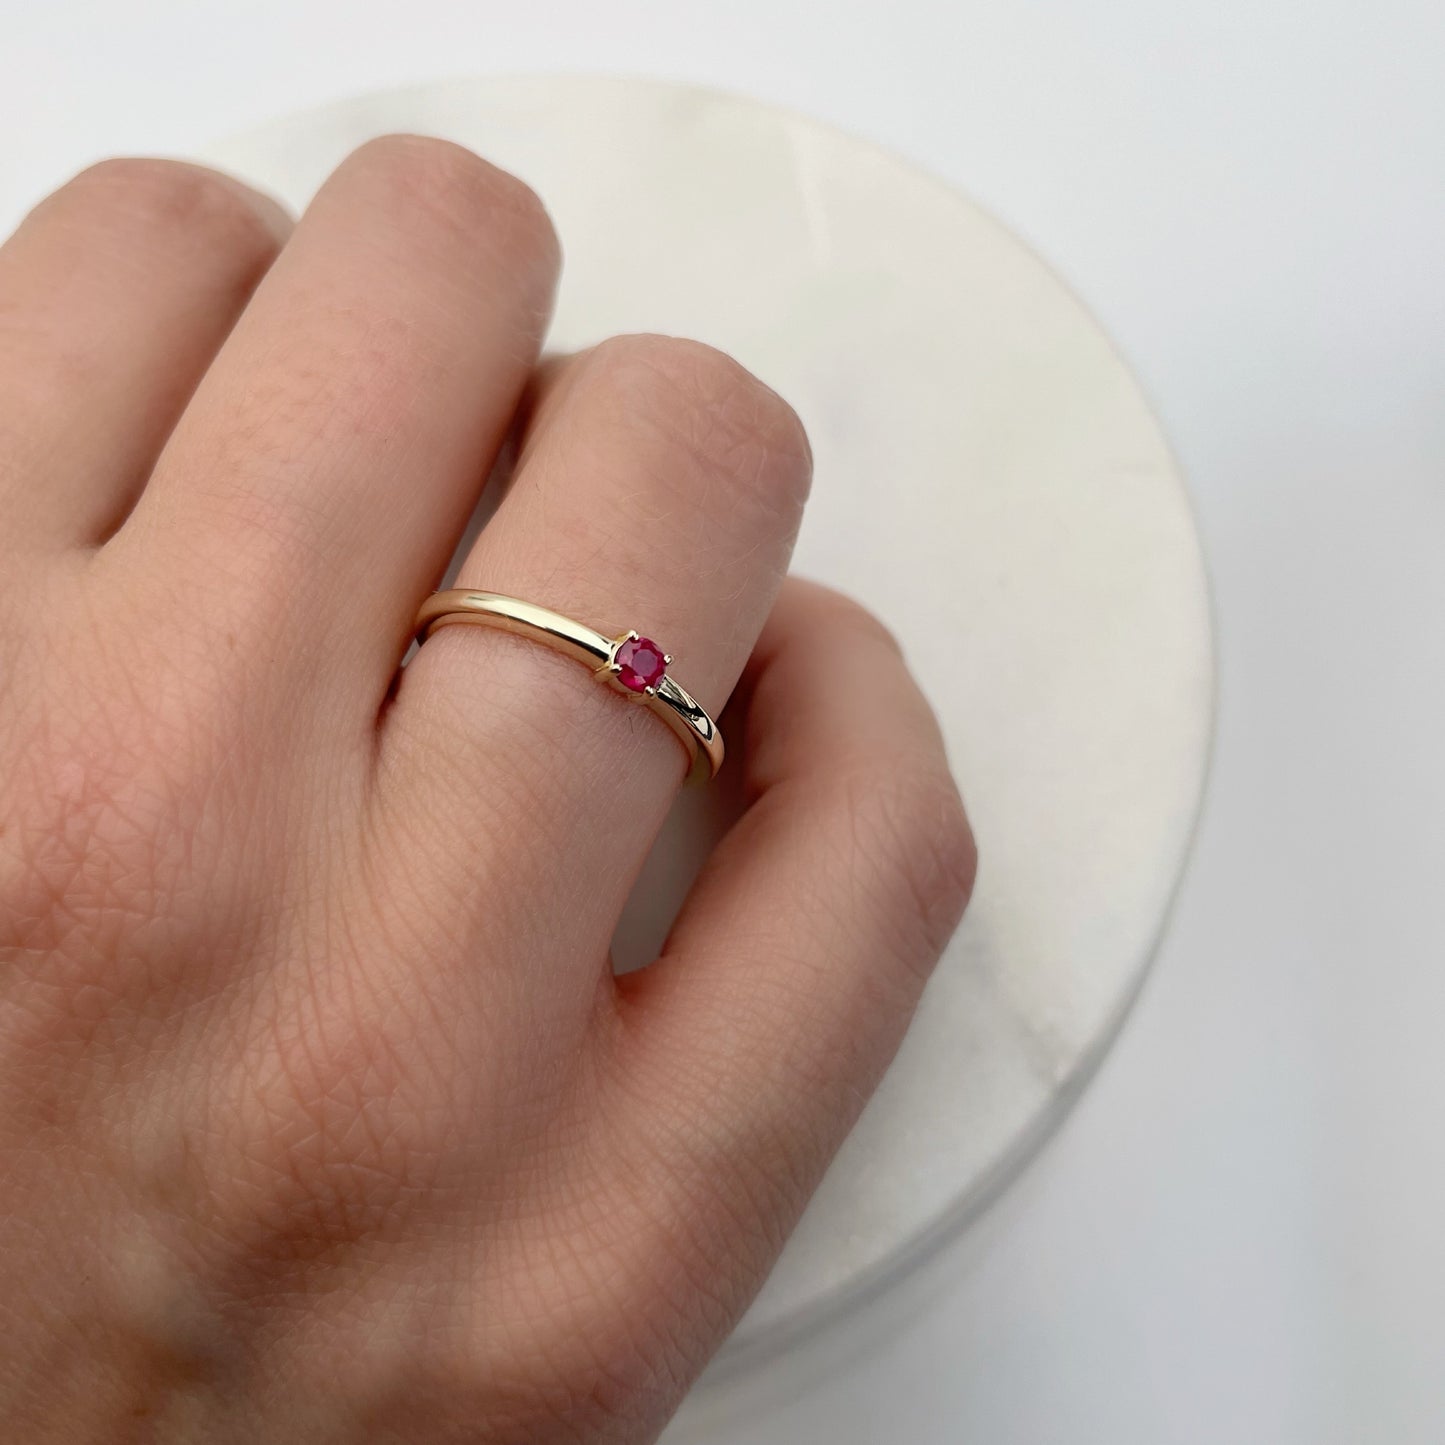 9ct gold stacking ring with ruby gemstone